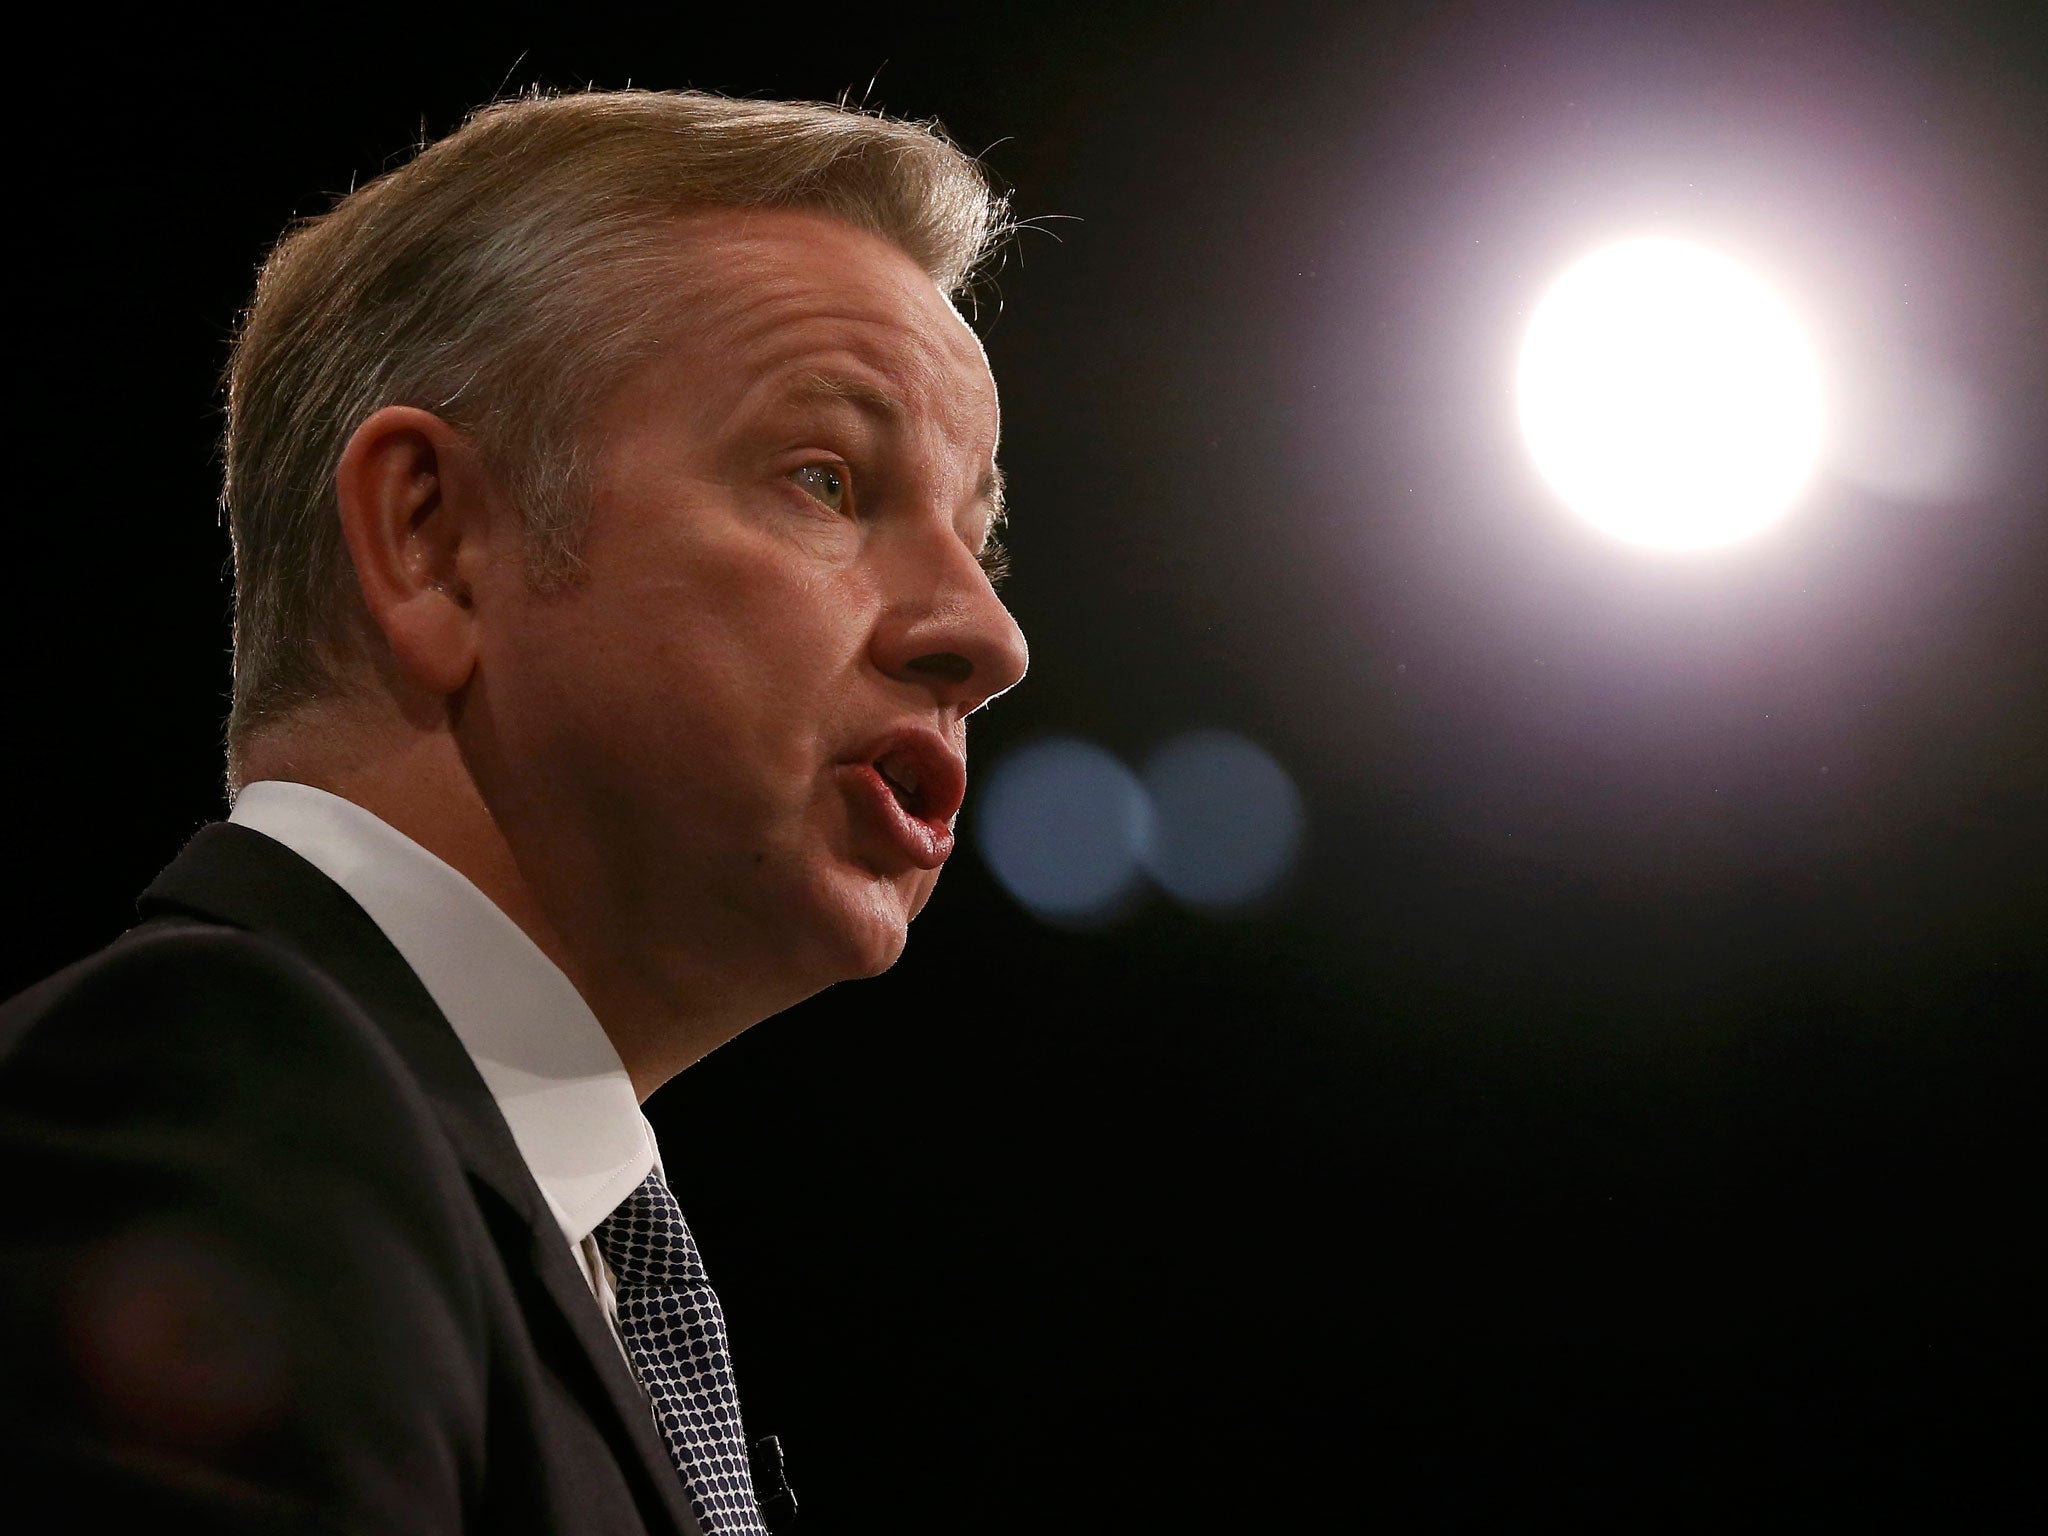 The Tory election manifesto suggested scrapping the act would be top of Michael Gove's agenda